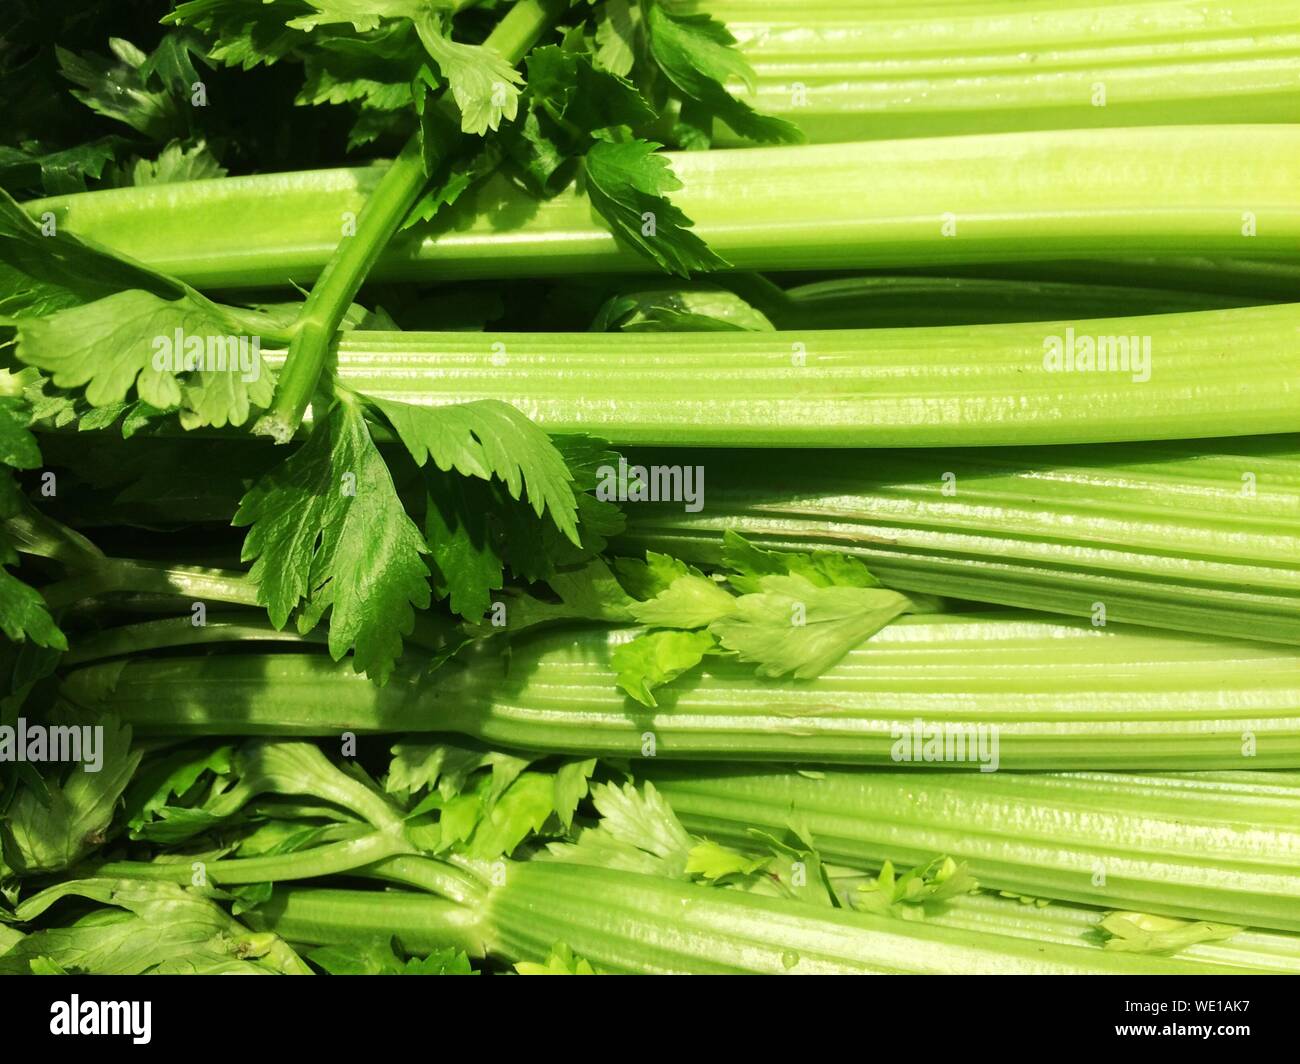 Close-up Of Fresh Green Leafy Vegetable At Market Stall Stock Photo